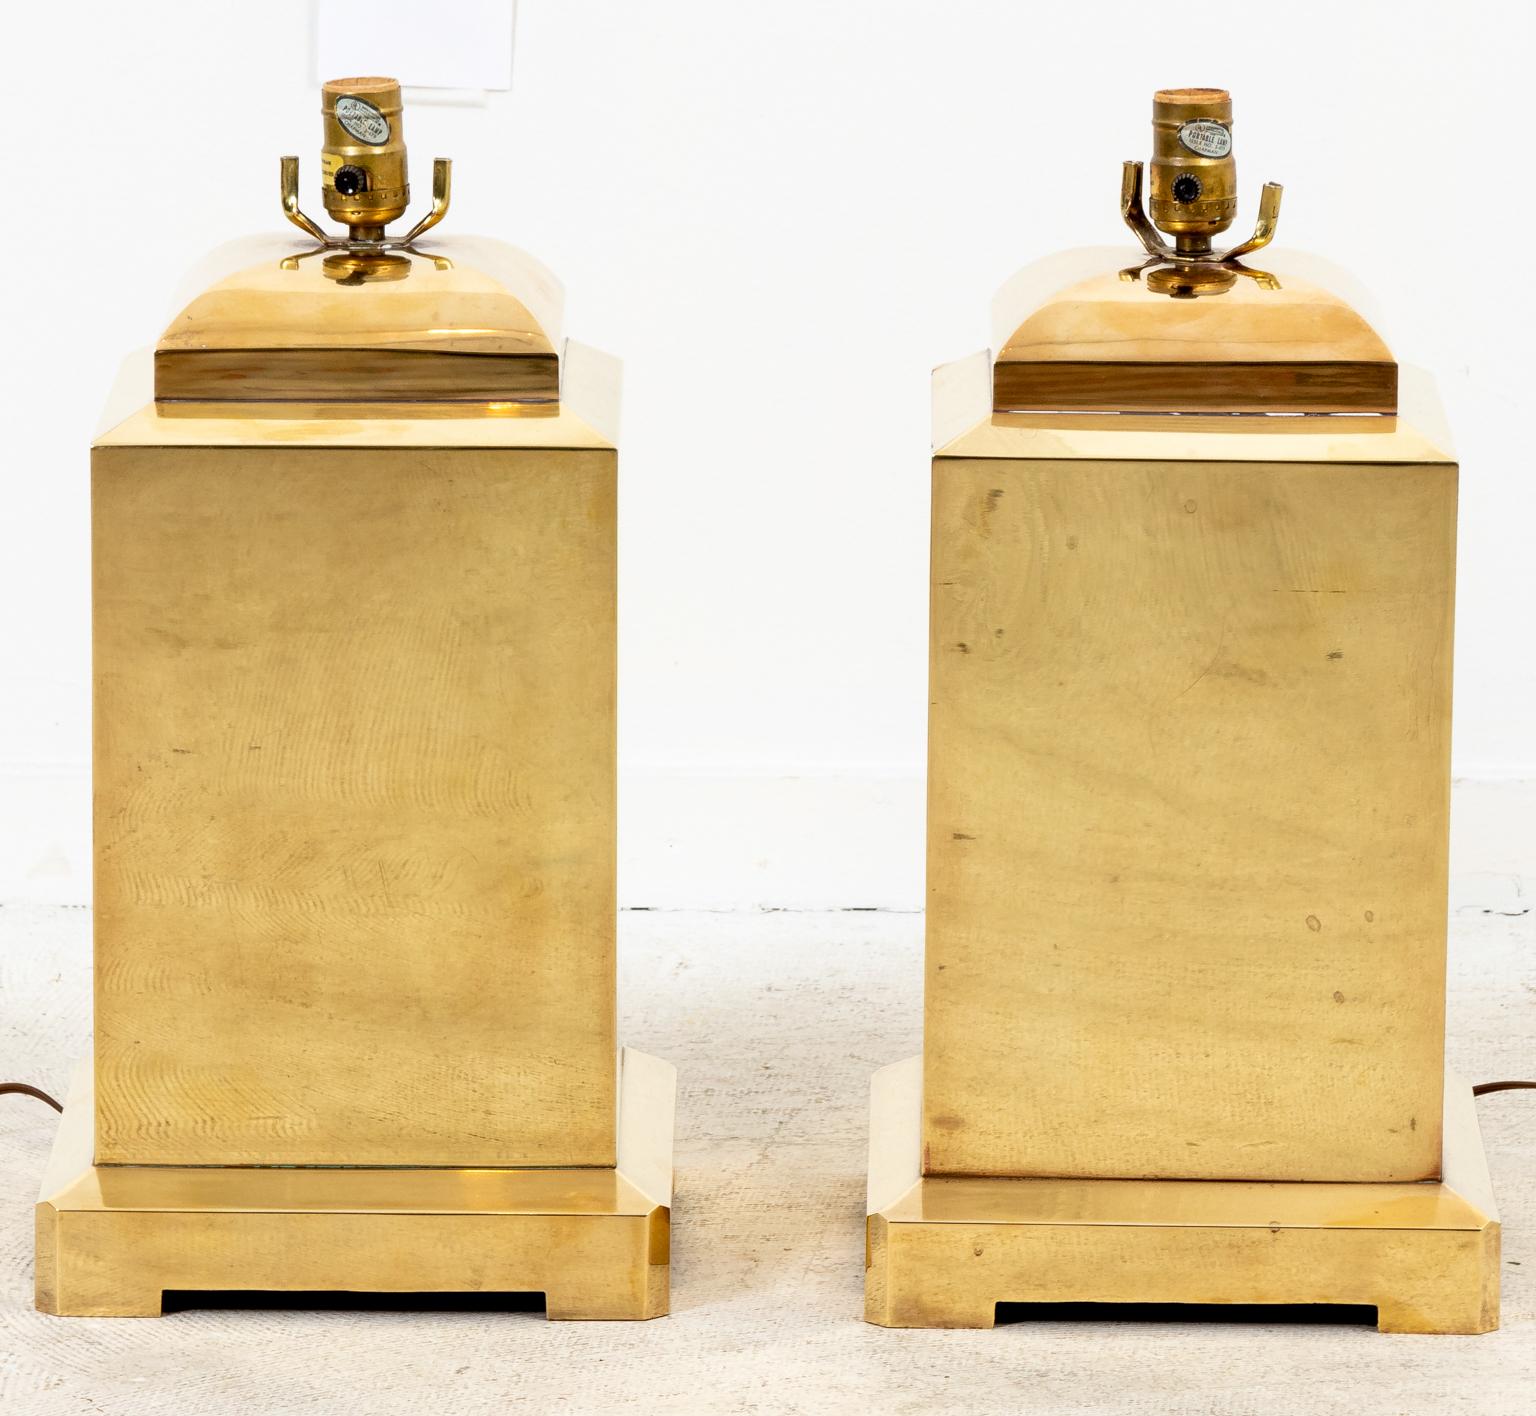 Pair of Mid-Century Modern style chapman brass lamps with label on the socket, circa 1979. Made in the United States. Please note of wear consistent with age including minor dents. Shades not included.